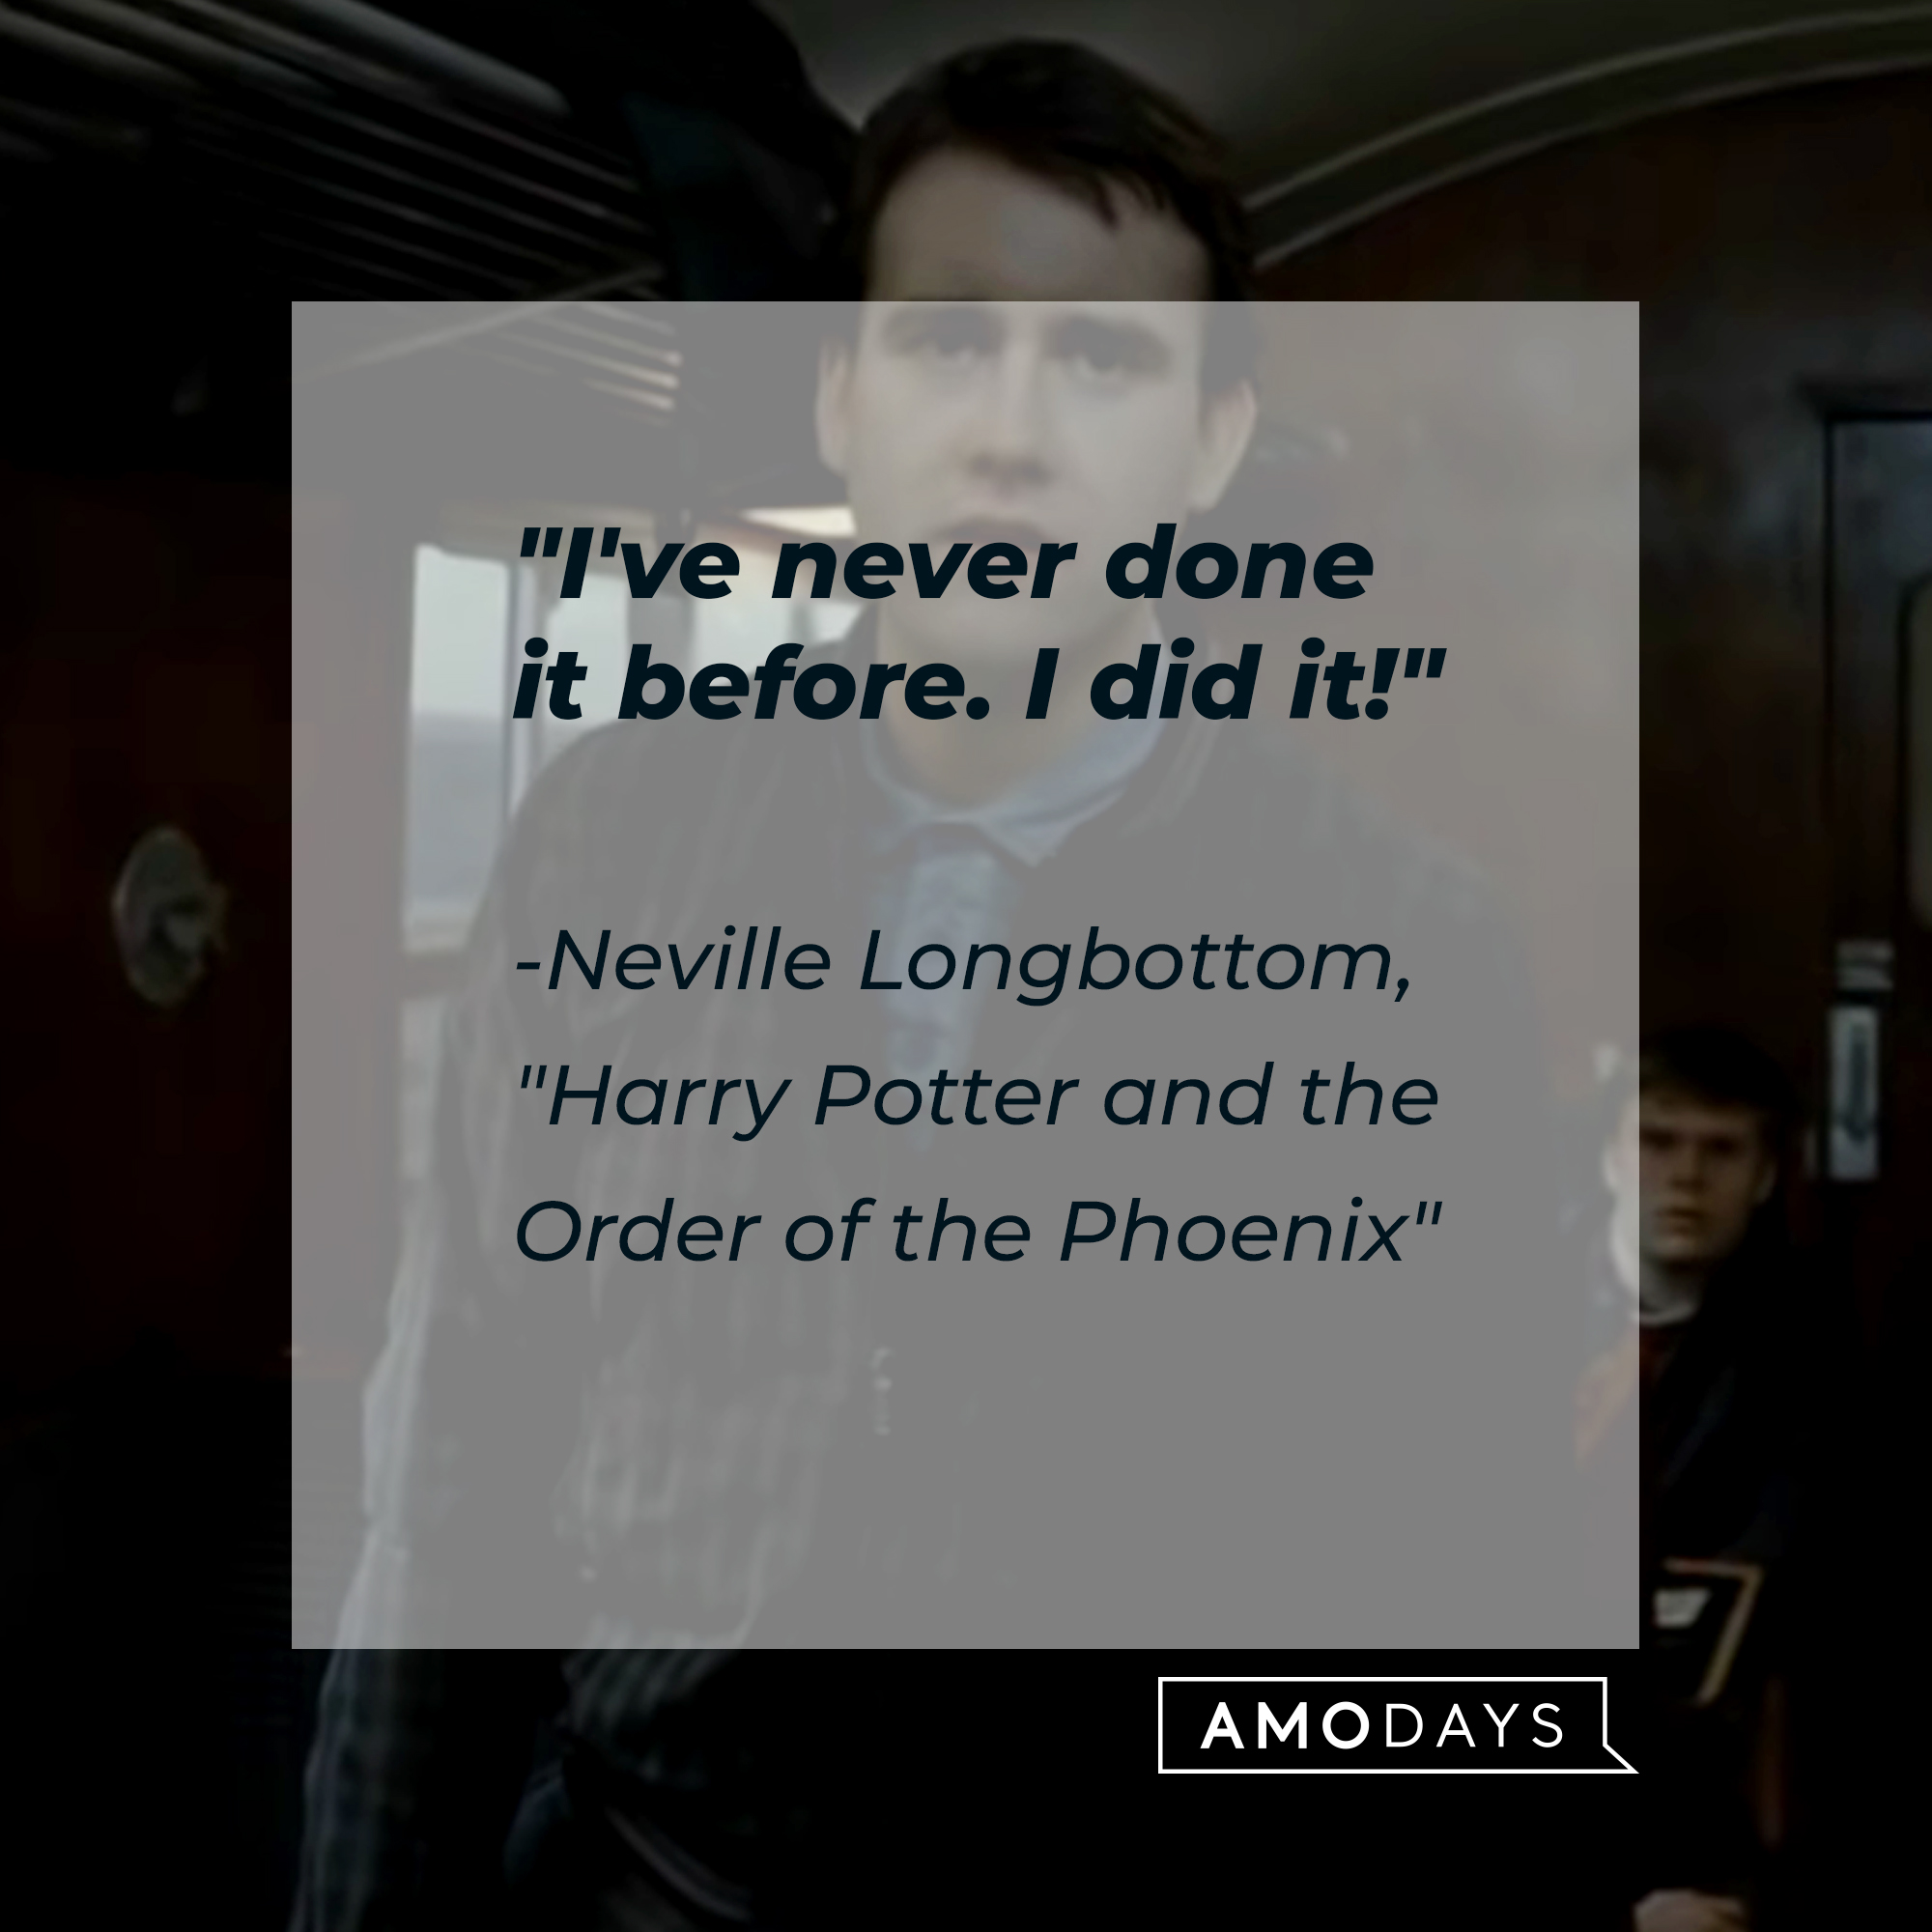 Neville Longbottom with his quote: "I've never done it before. I did it!" | Source: Facebook.com/harrypotter